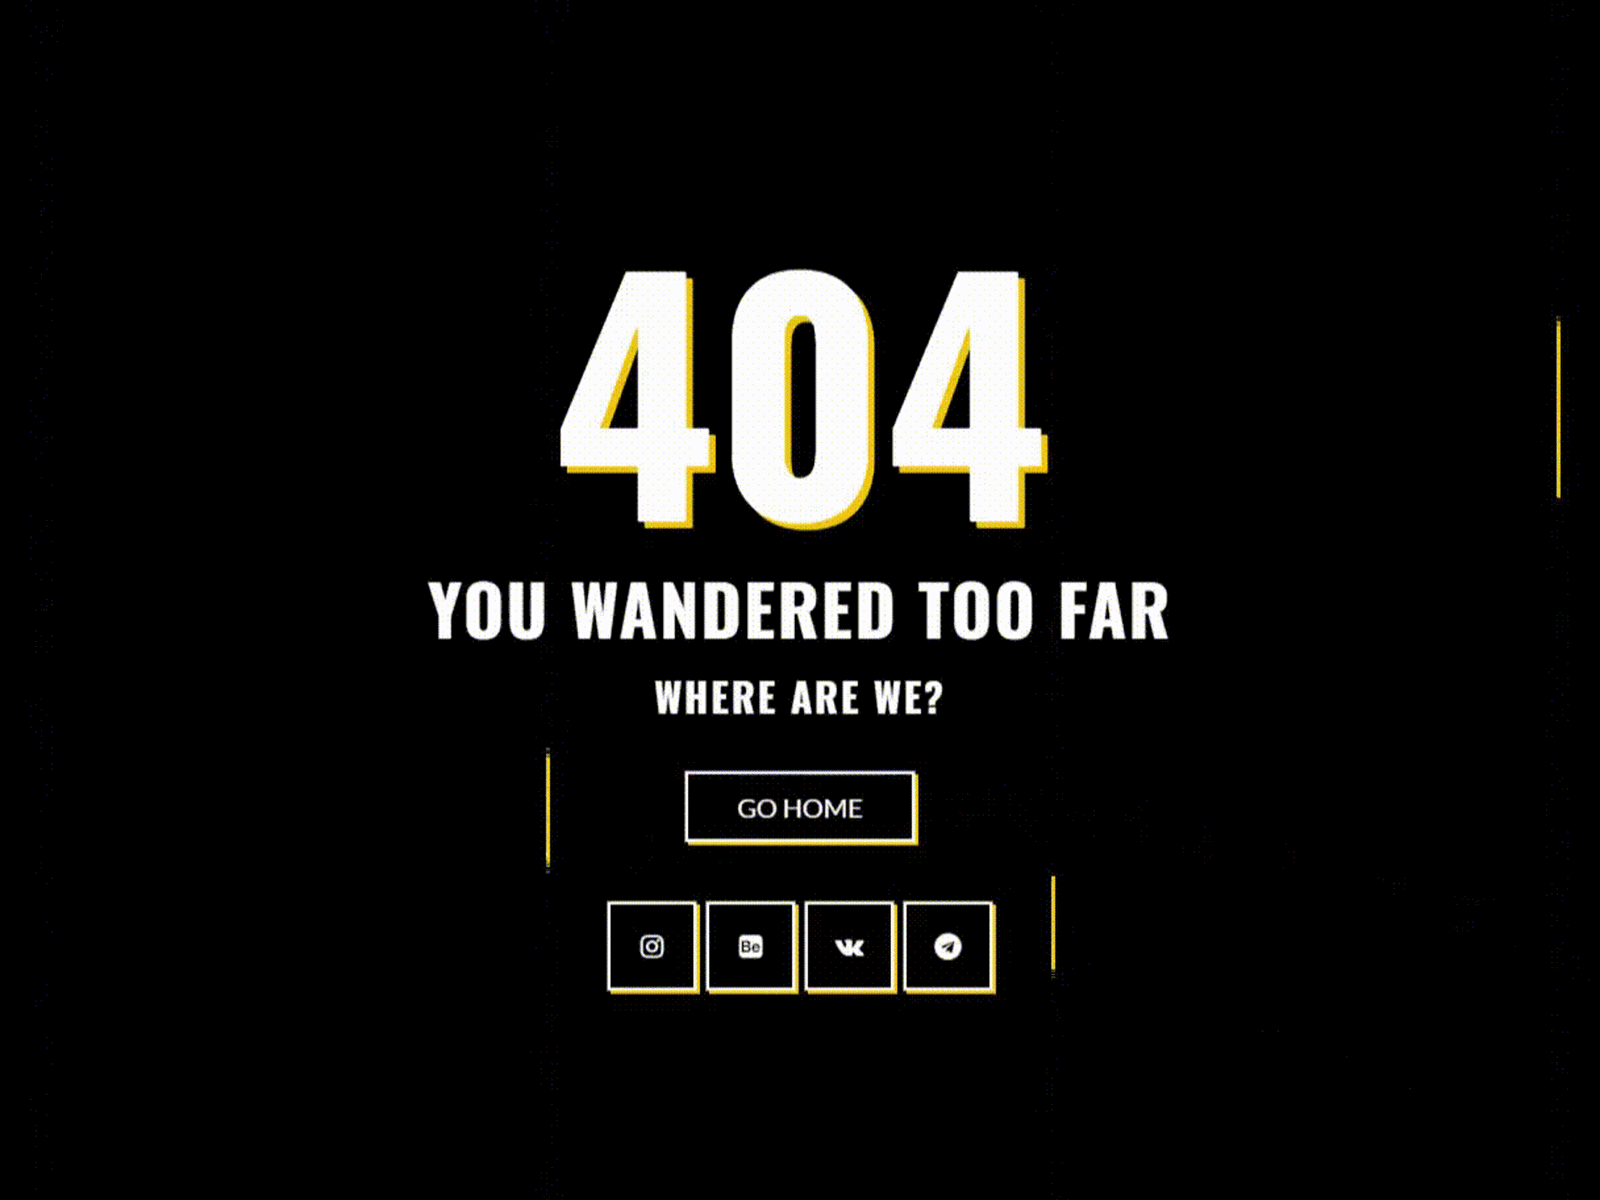 Vector Animation of the Error page "404"